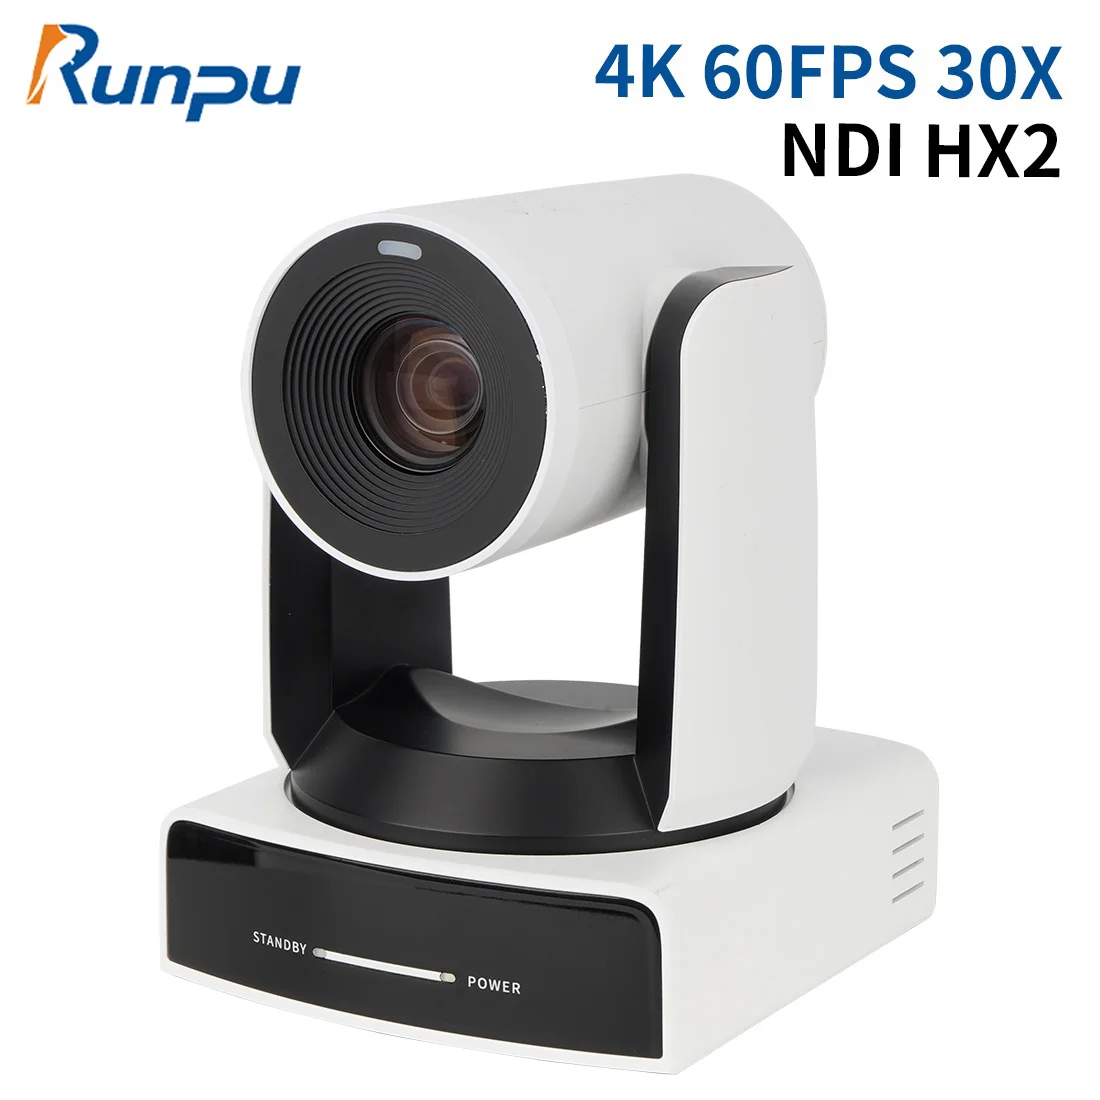 4K NDI Camera 60FPS 30X Optical Zoom AI Auto Tracking PTZ Camera with PoE HDMI SDI USB Tally Lamp for Live Streaming,Youtube OBS professional all in one 1080p 60fps h265 hdmi sdi usb output teaching tracking 12x ptz camera auto tracking with dual cam rp e30